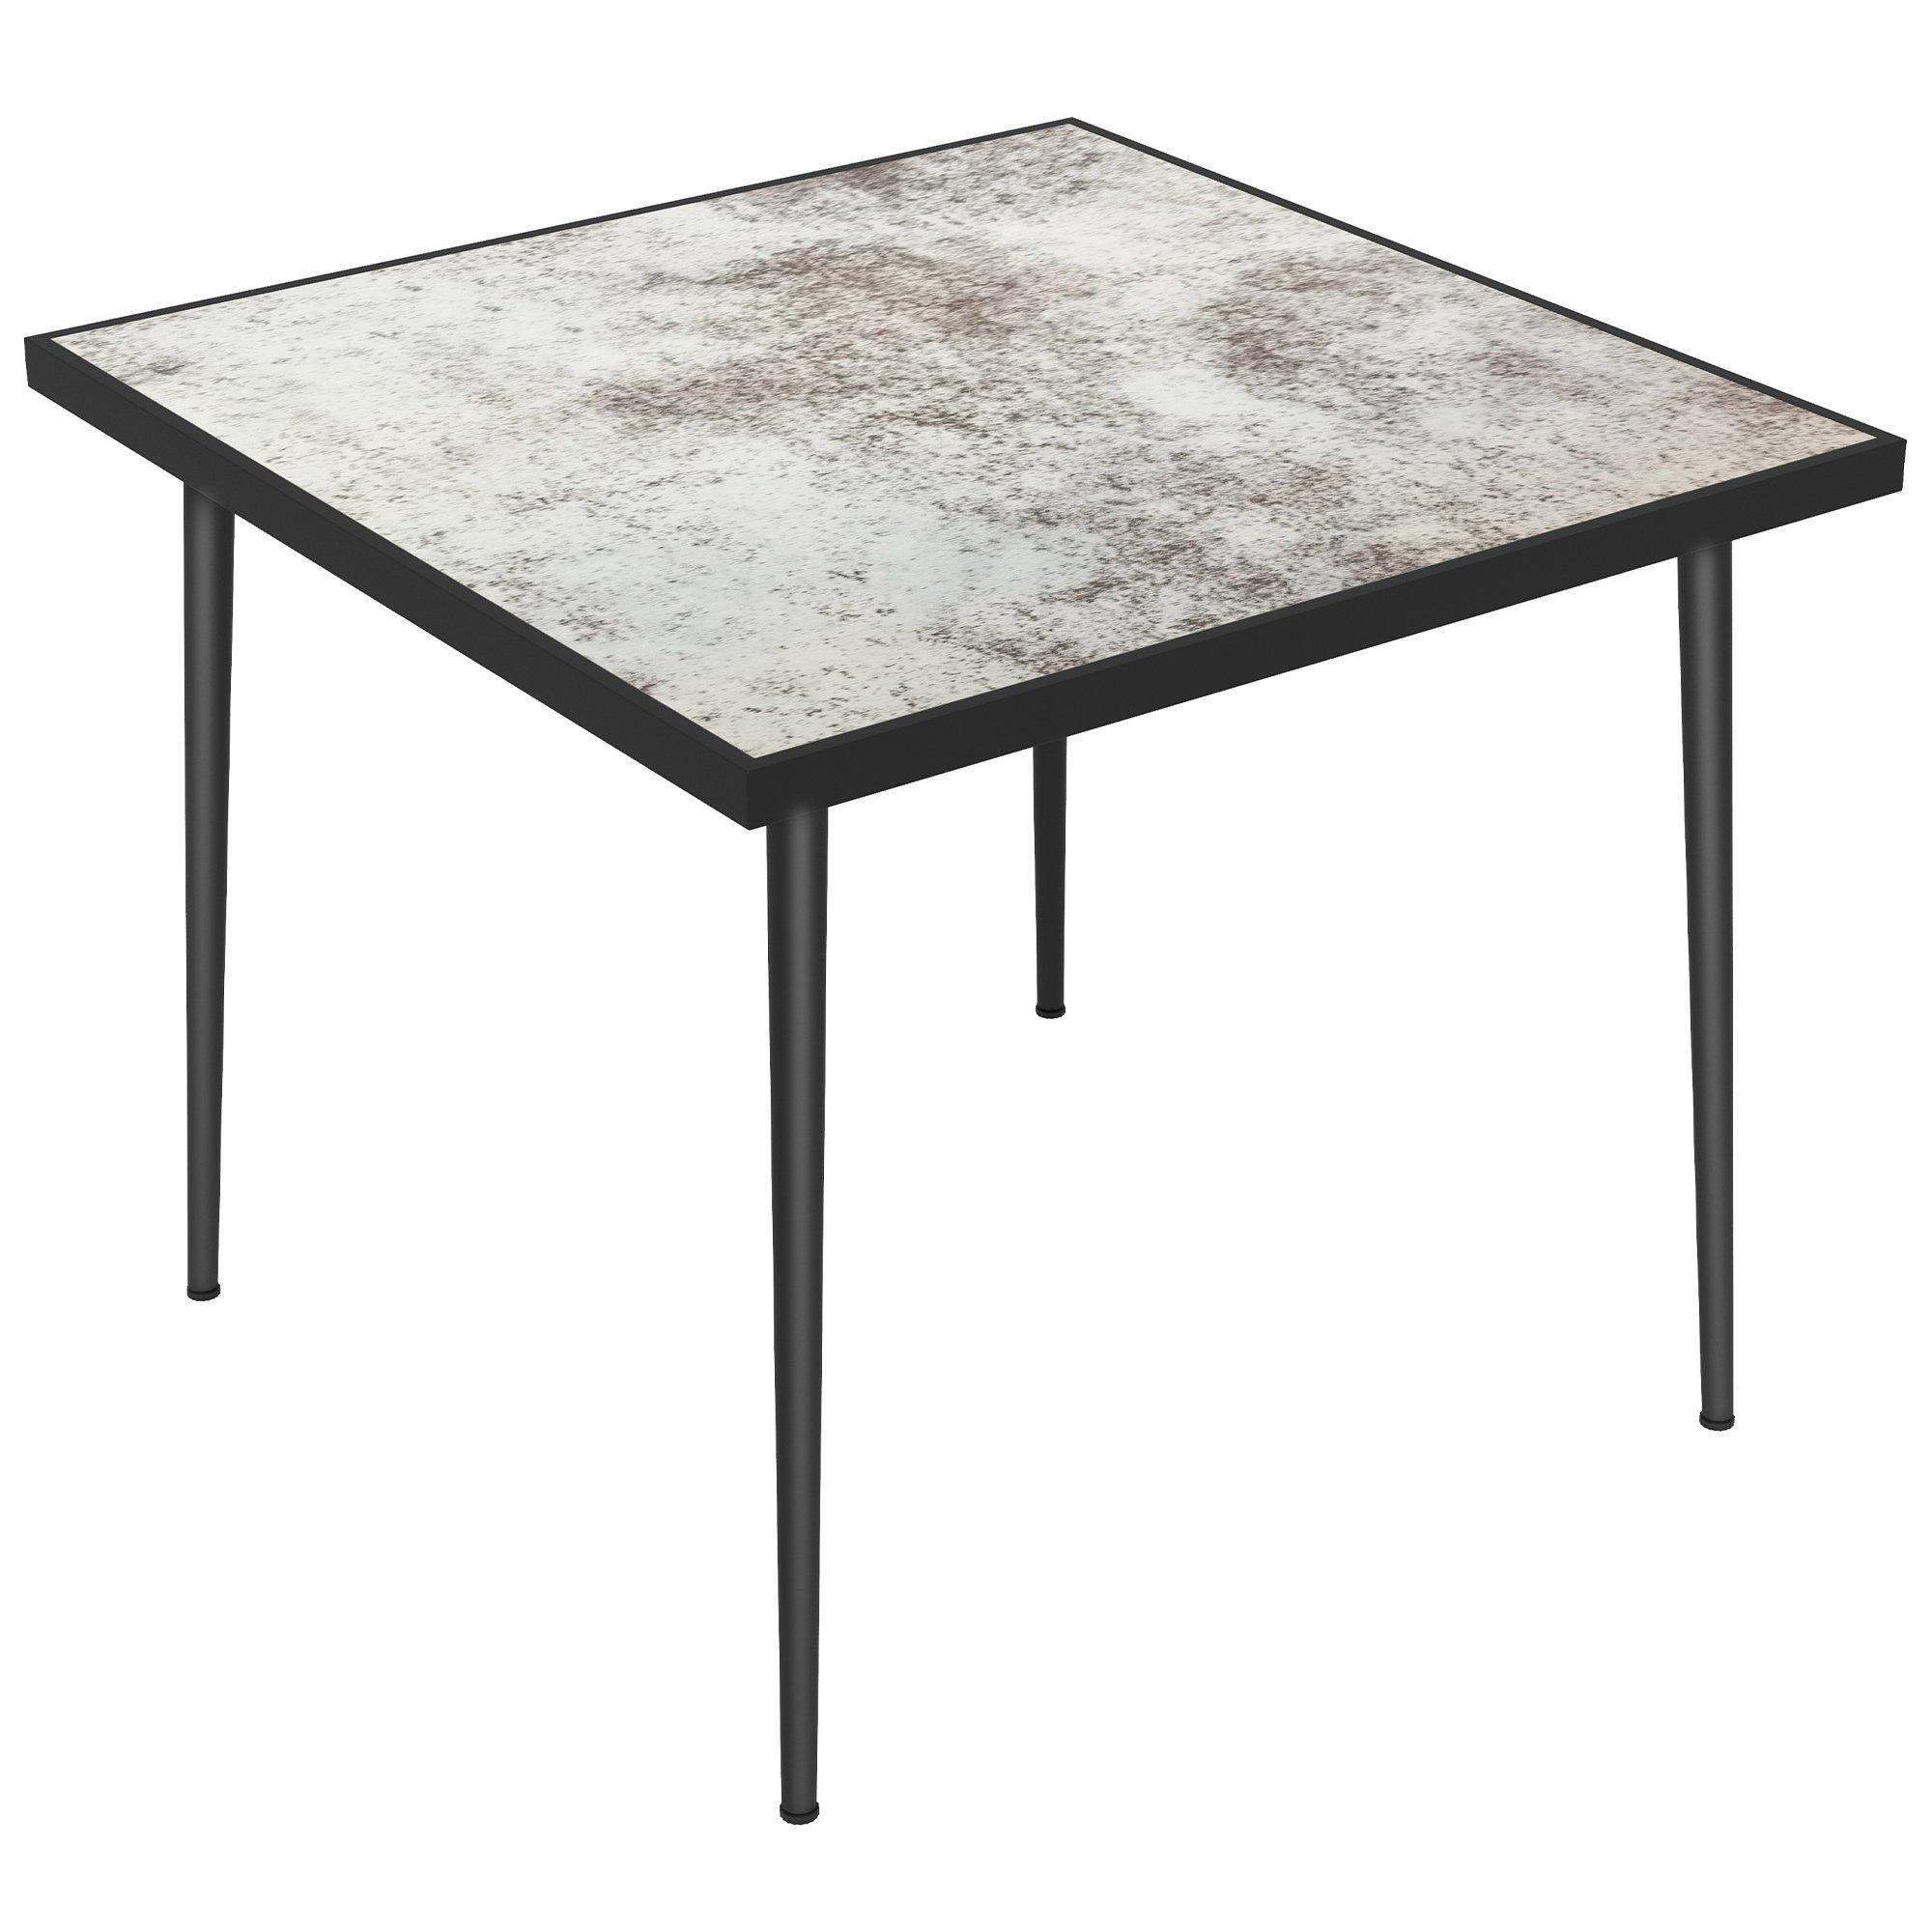 Square Outdoor Dining Table with Marble Effect Top Steel Frame for Patio - image 1